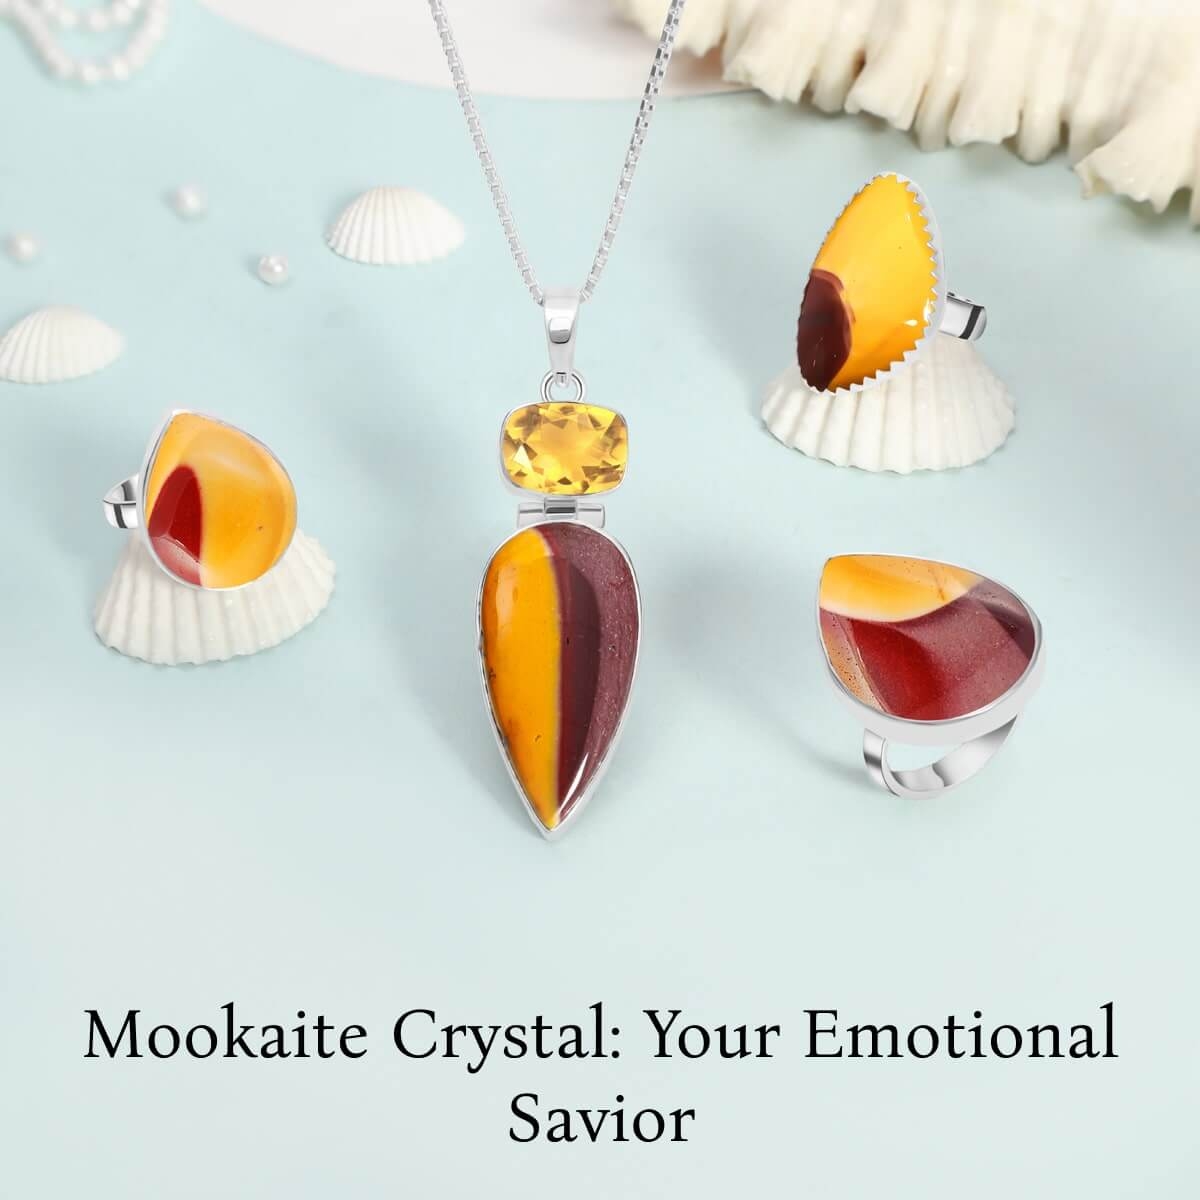 Heal Yourself Emotionally & Physically With Mookaite Crystal